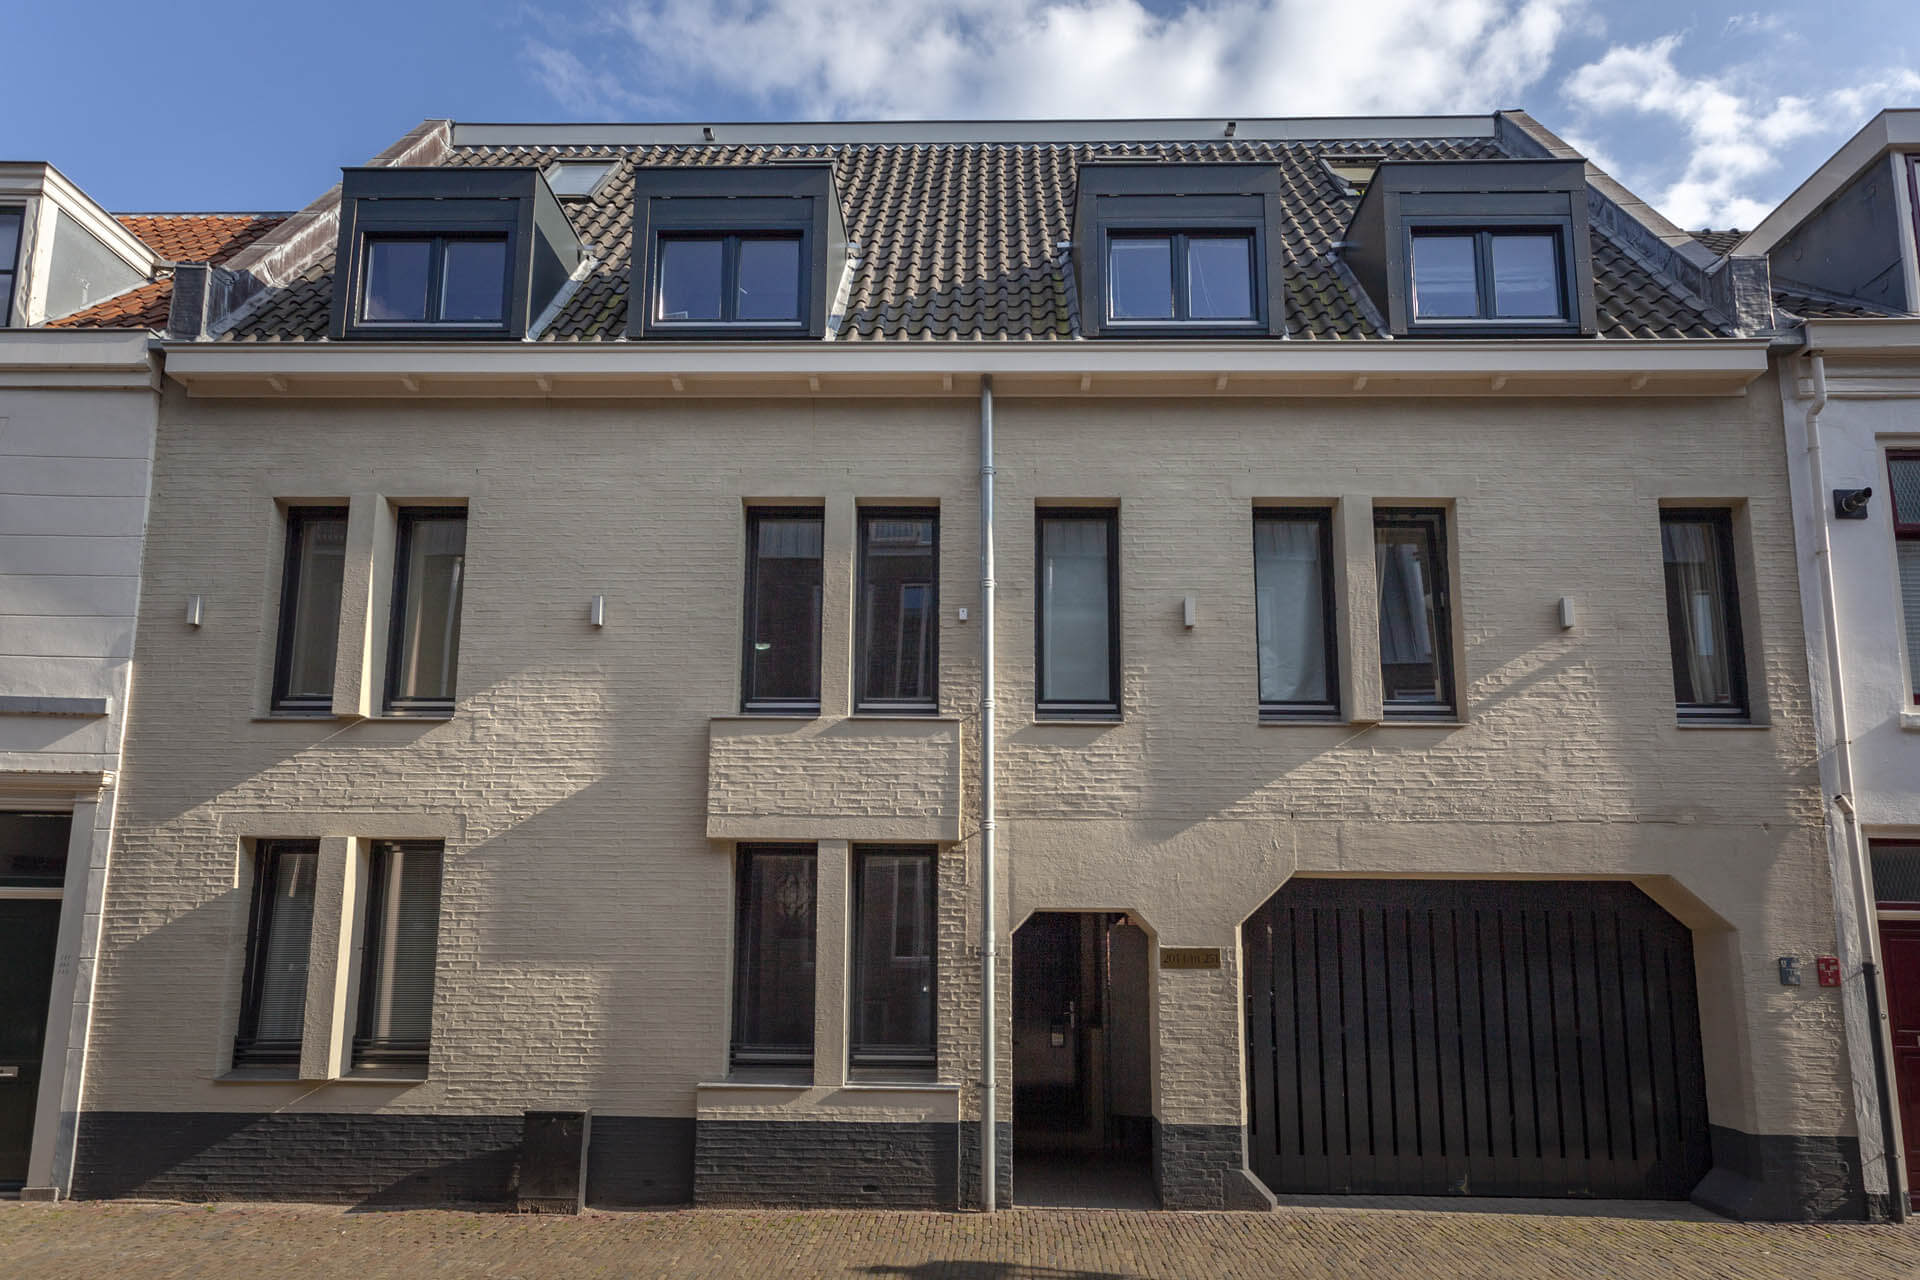 Outside view of house at Groenstraat utrecht